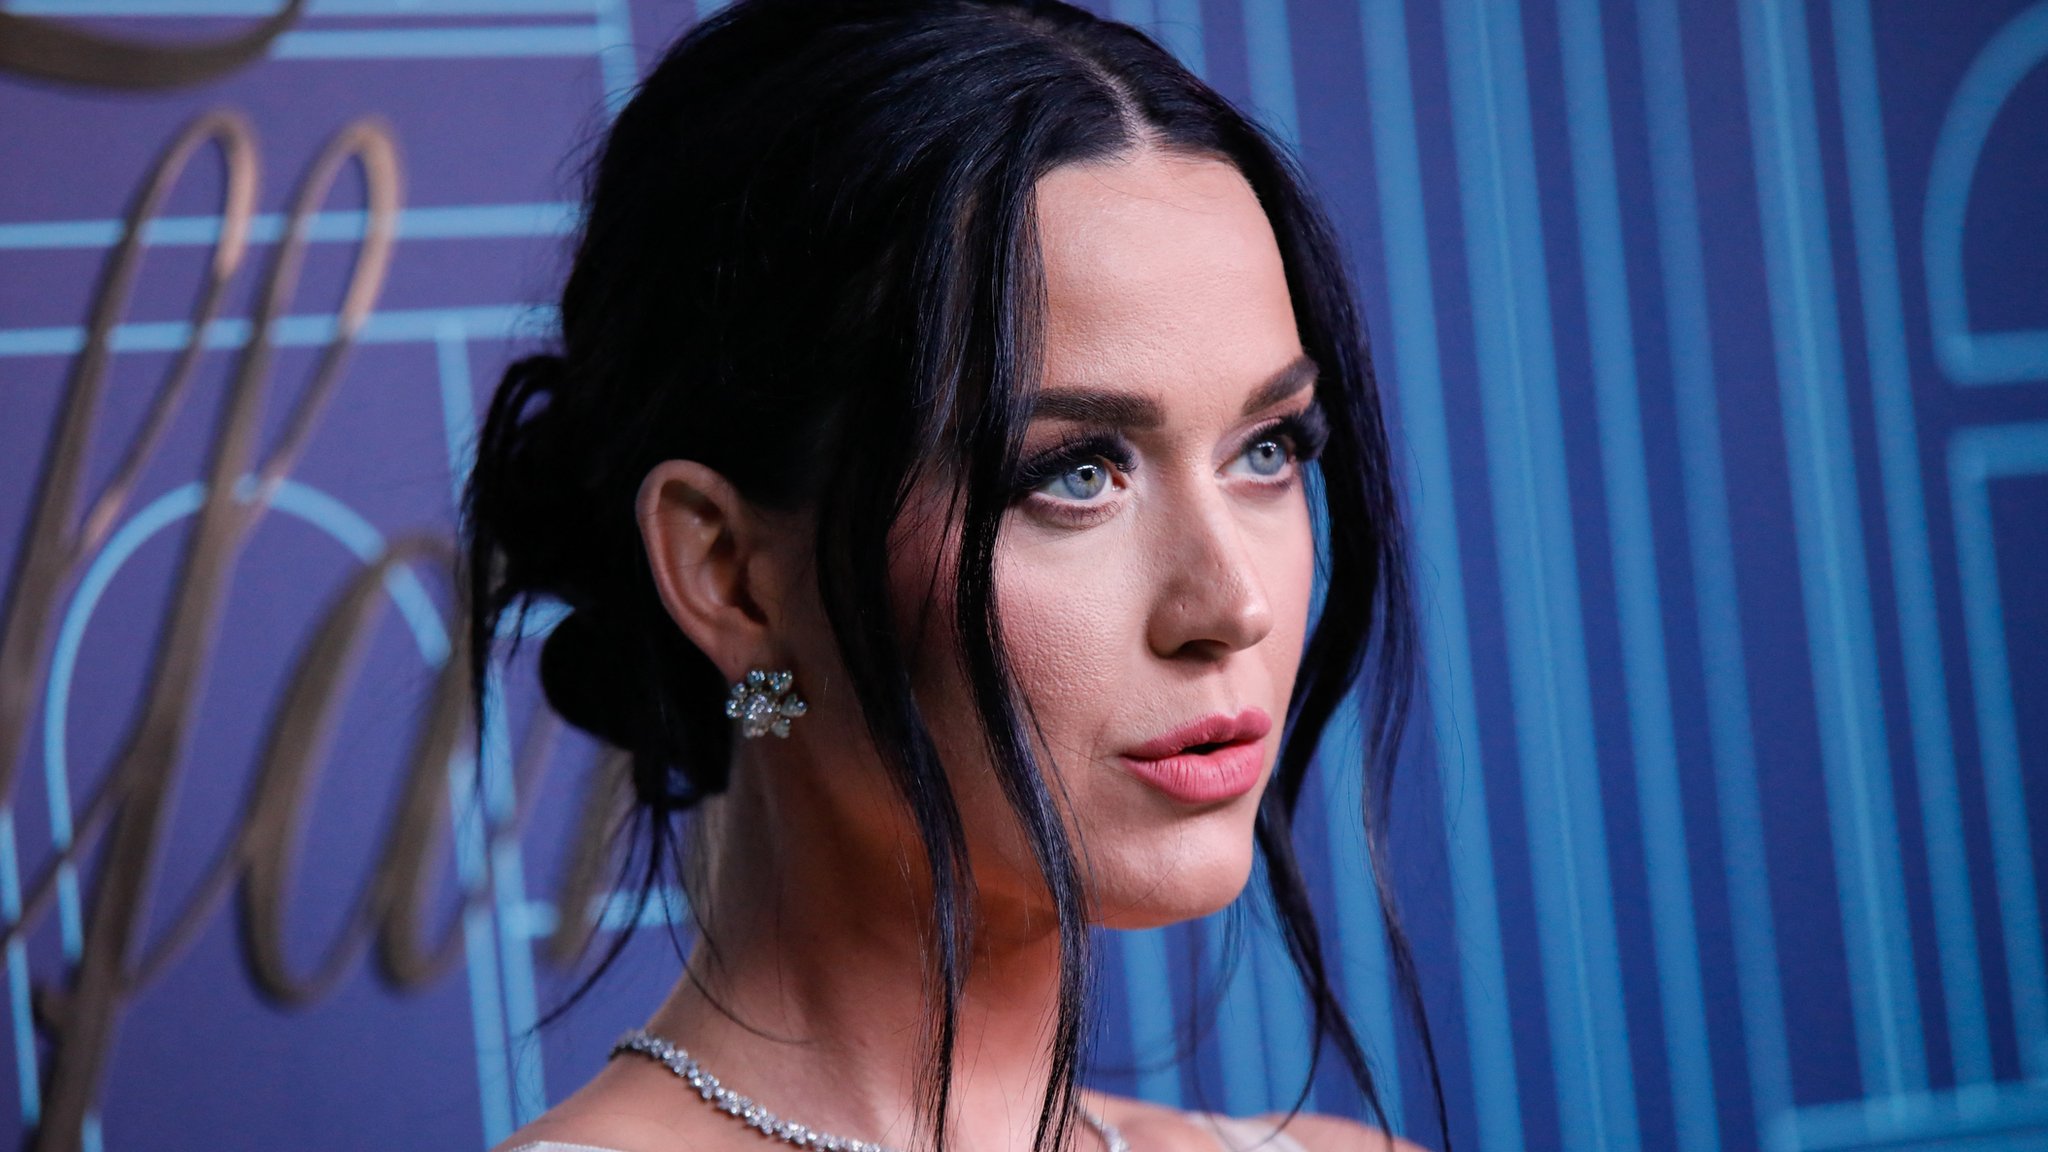 Katy Perry loses trademark battle with Katie Perry